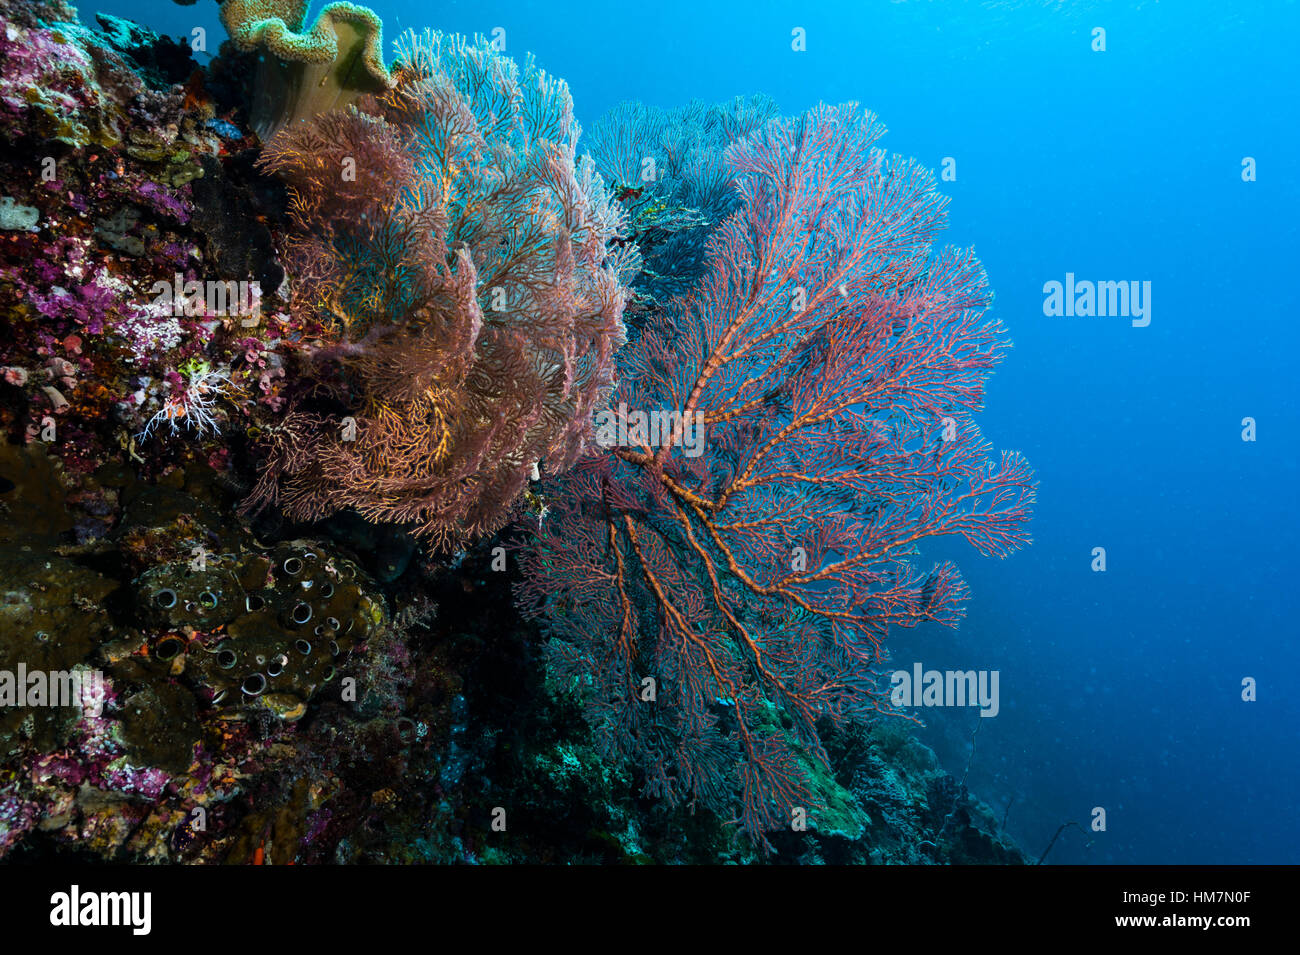 The bright red fragile lattice of a Gorgonian Sea Fan on the wall of a coral reef. Stock Photo